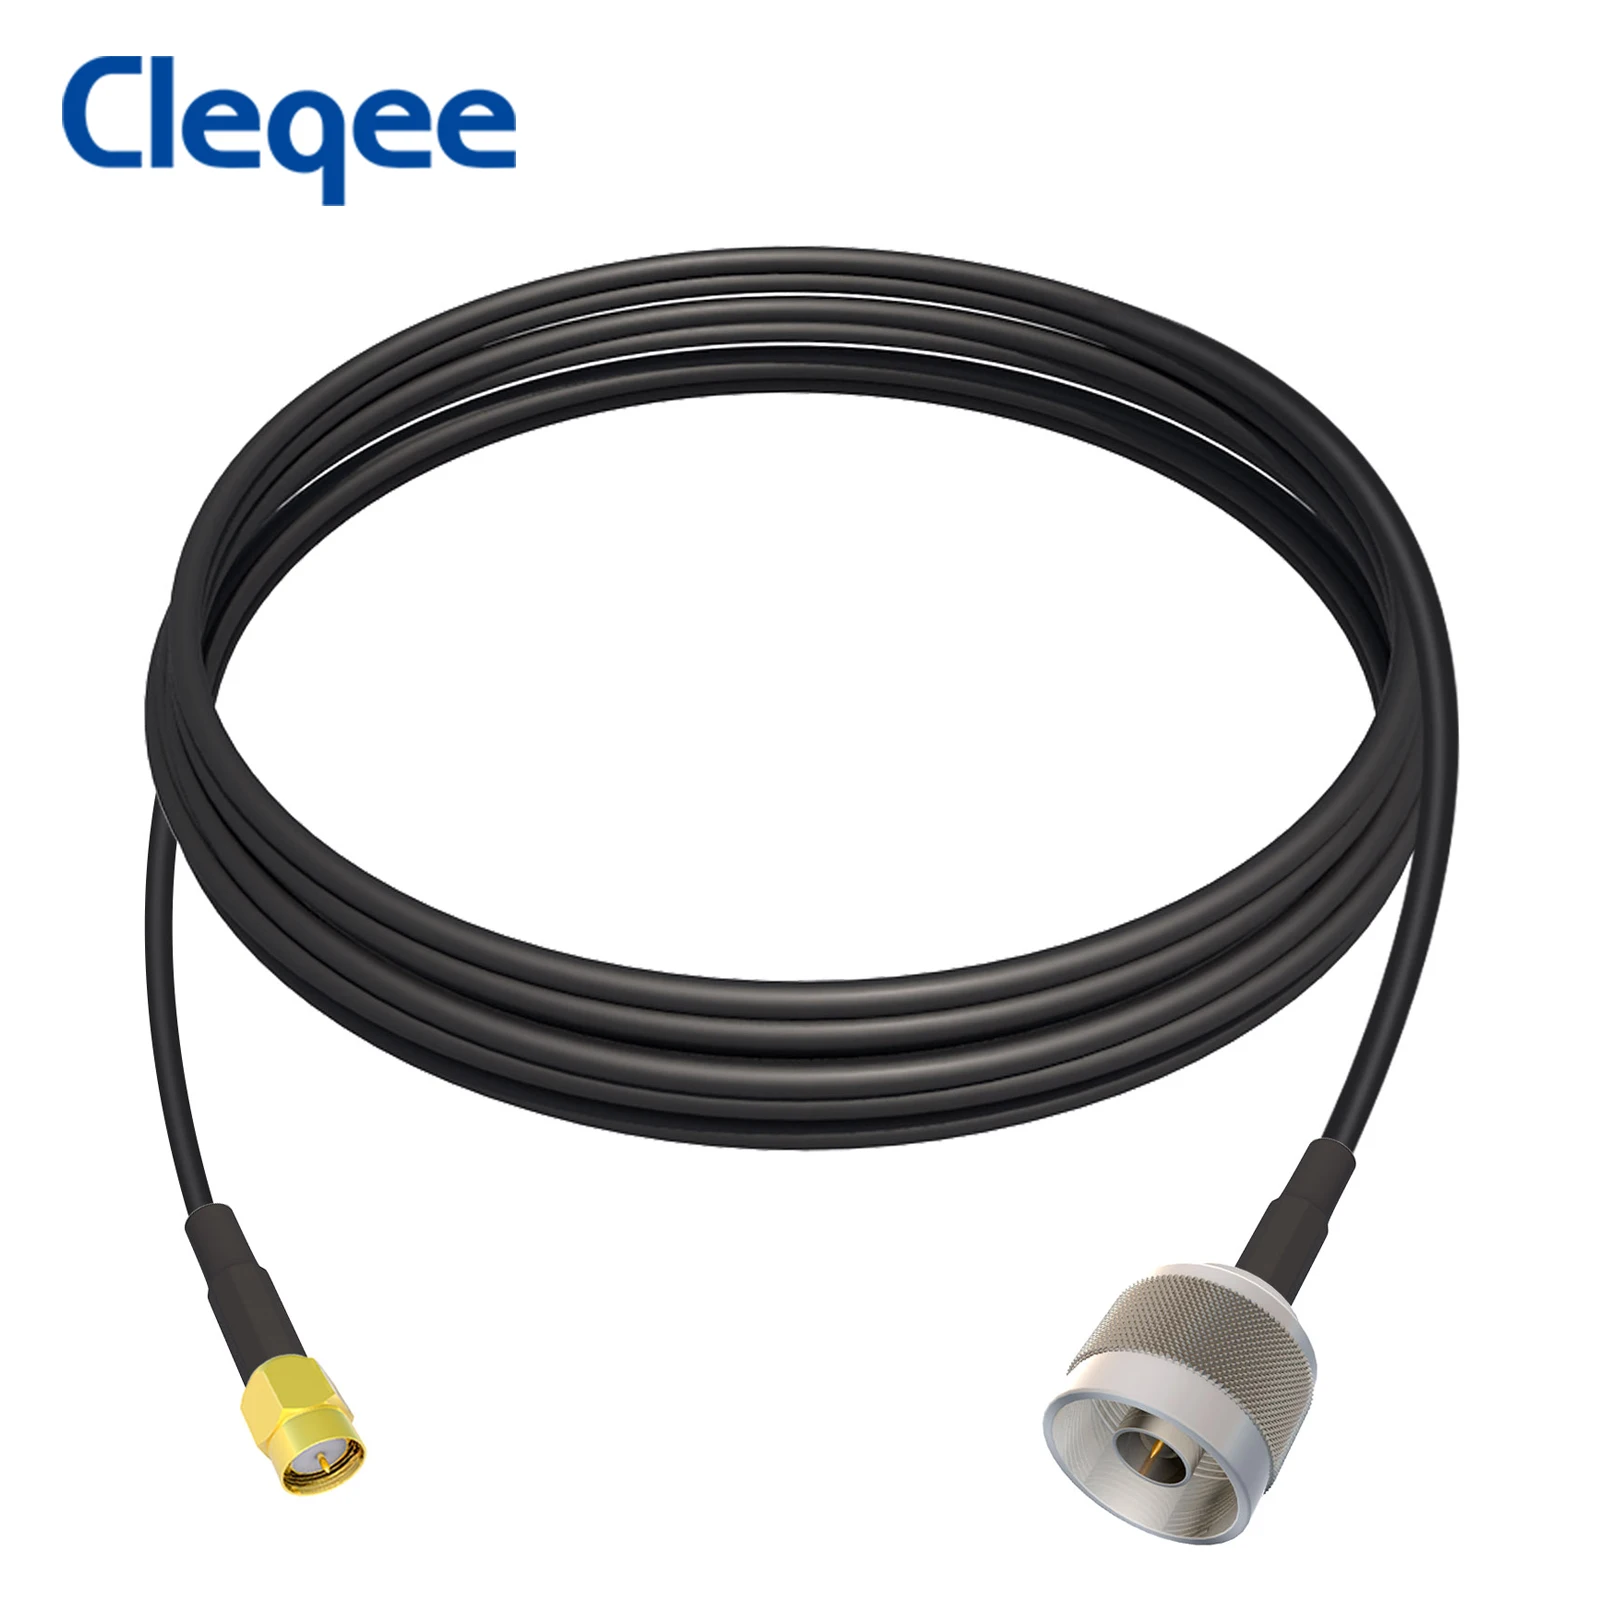 

Cleqee N-Type Male to SMA Male Low Loss Coaxial RG58 Extension Cable Wire for 3G-5G/LTE/ADS-B/Ham/GPS/WiFi/RF Radio to Antenna